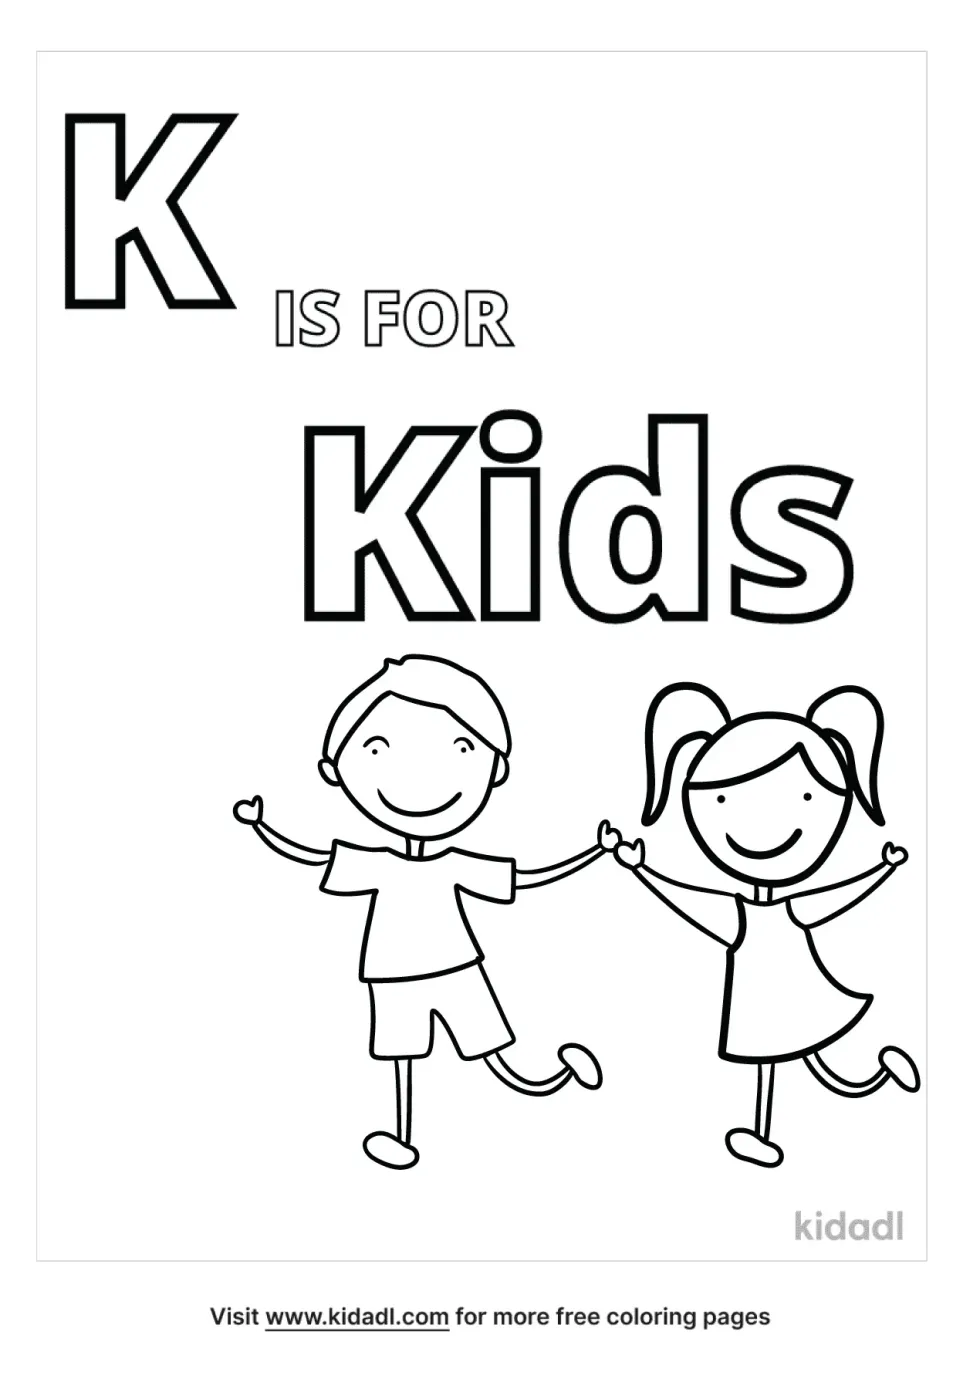 K Is For Kids